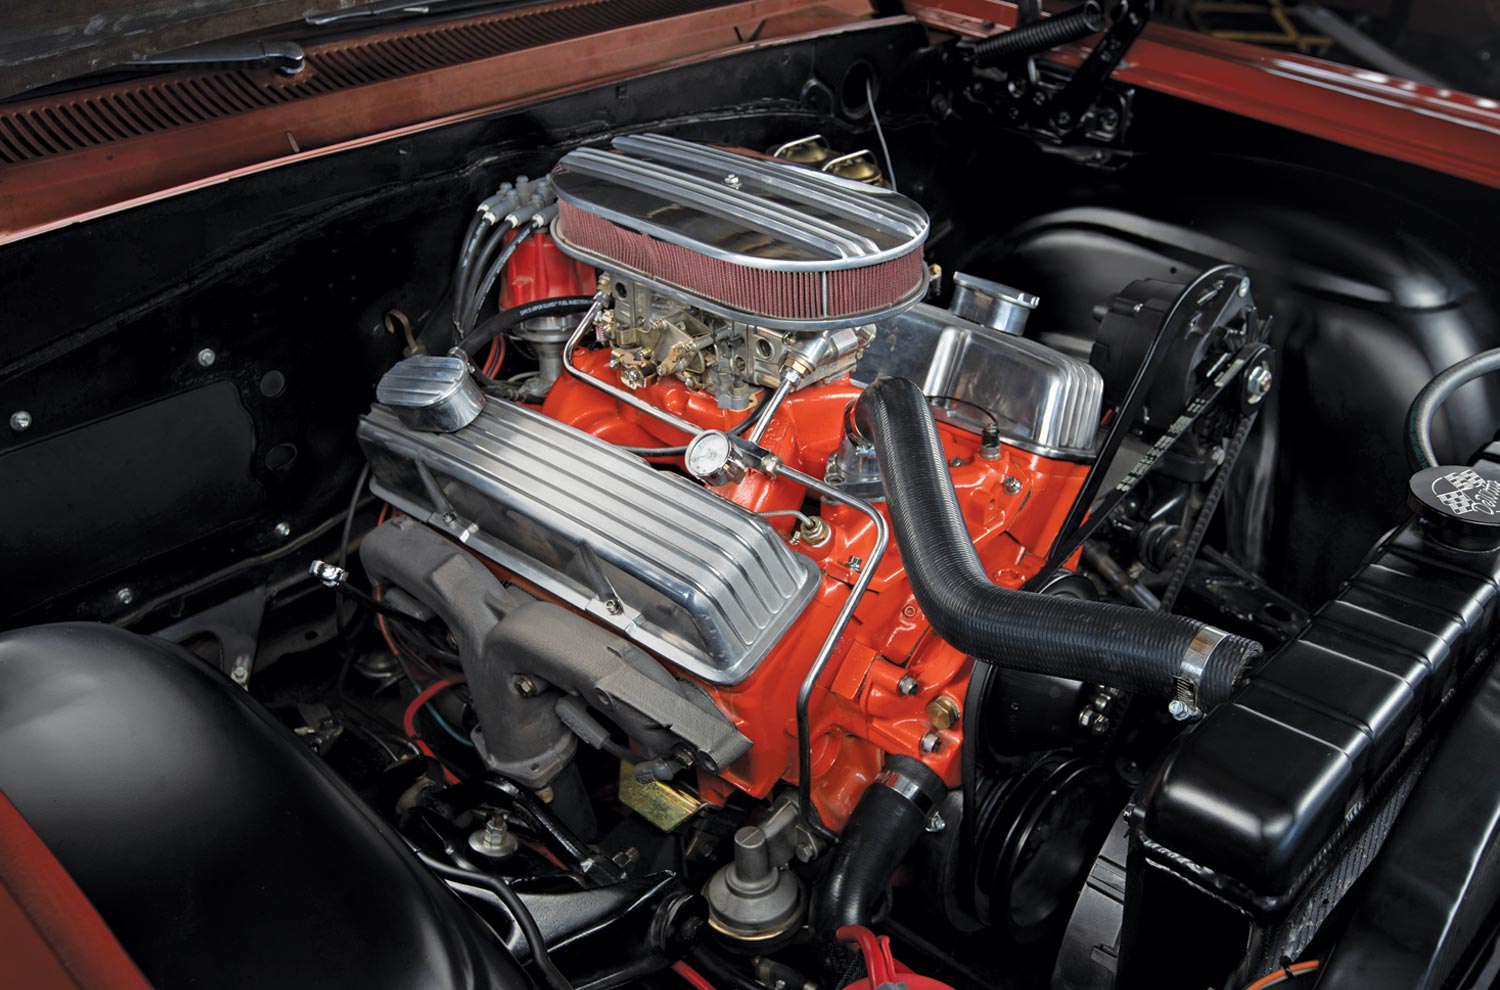 the completed engine, installed in the '63 Chevy Impala